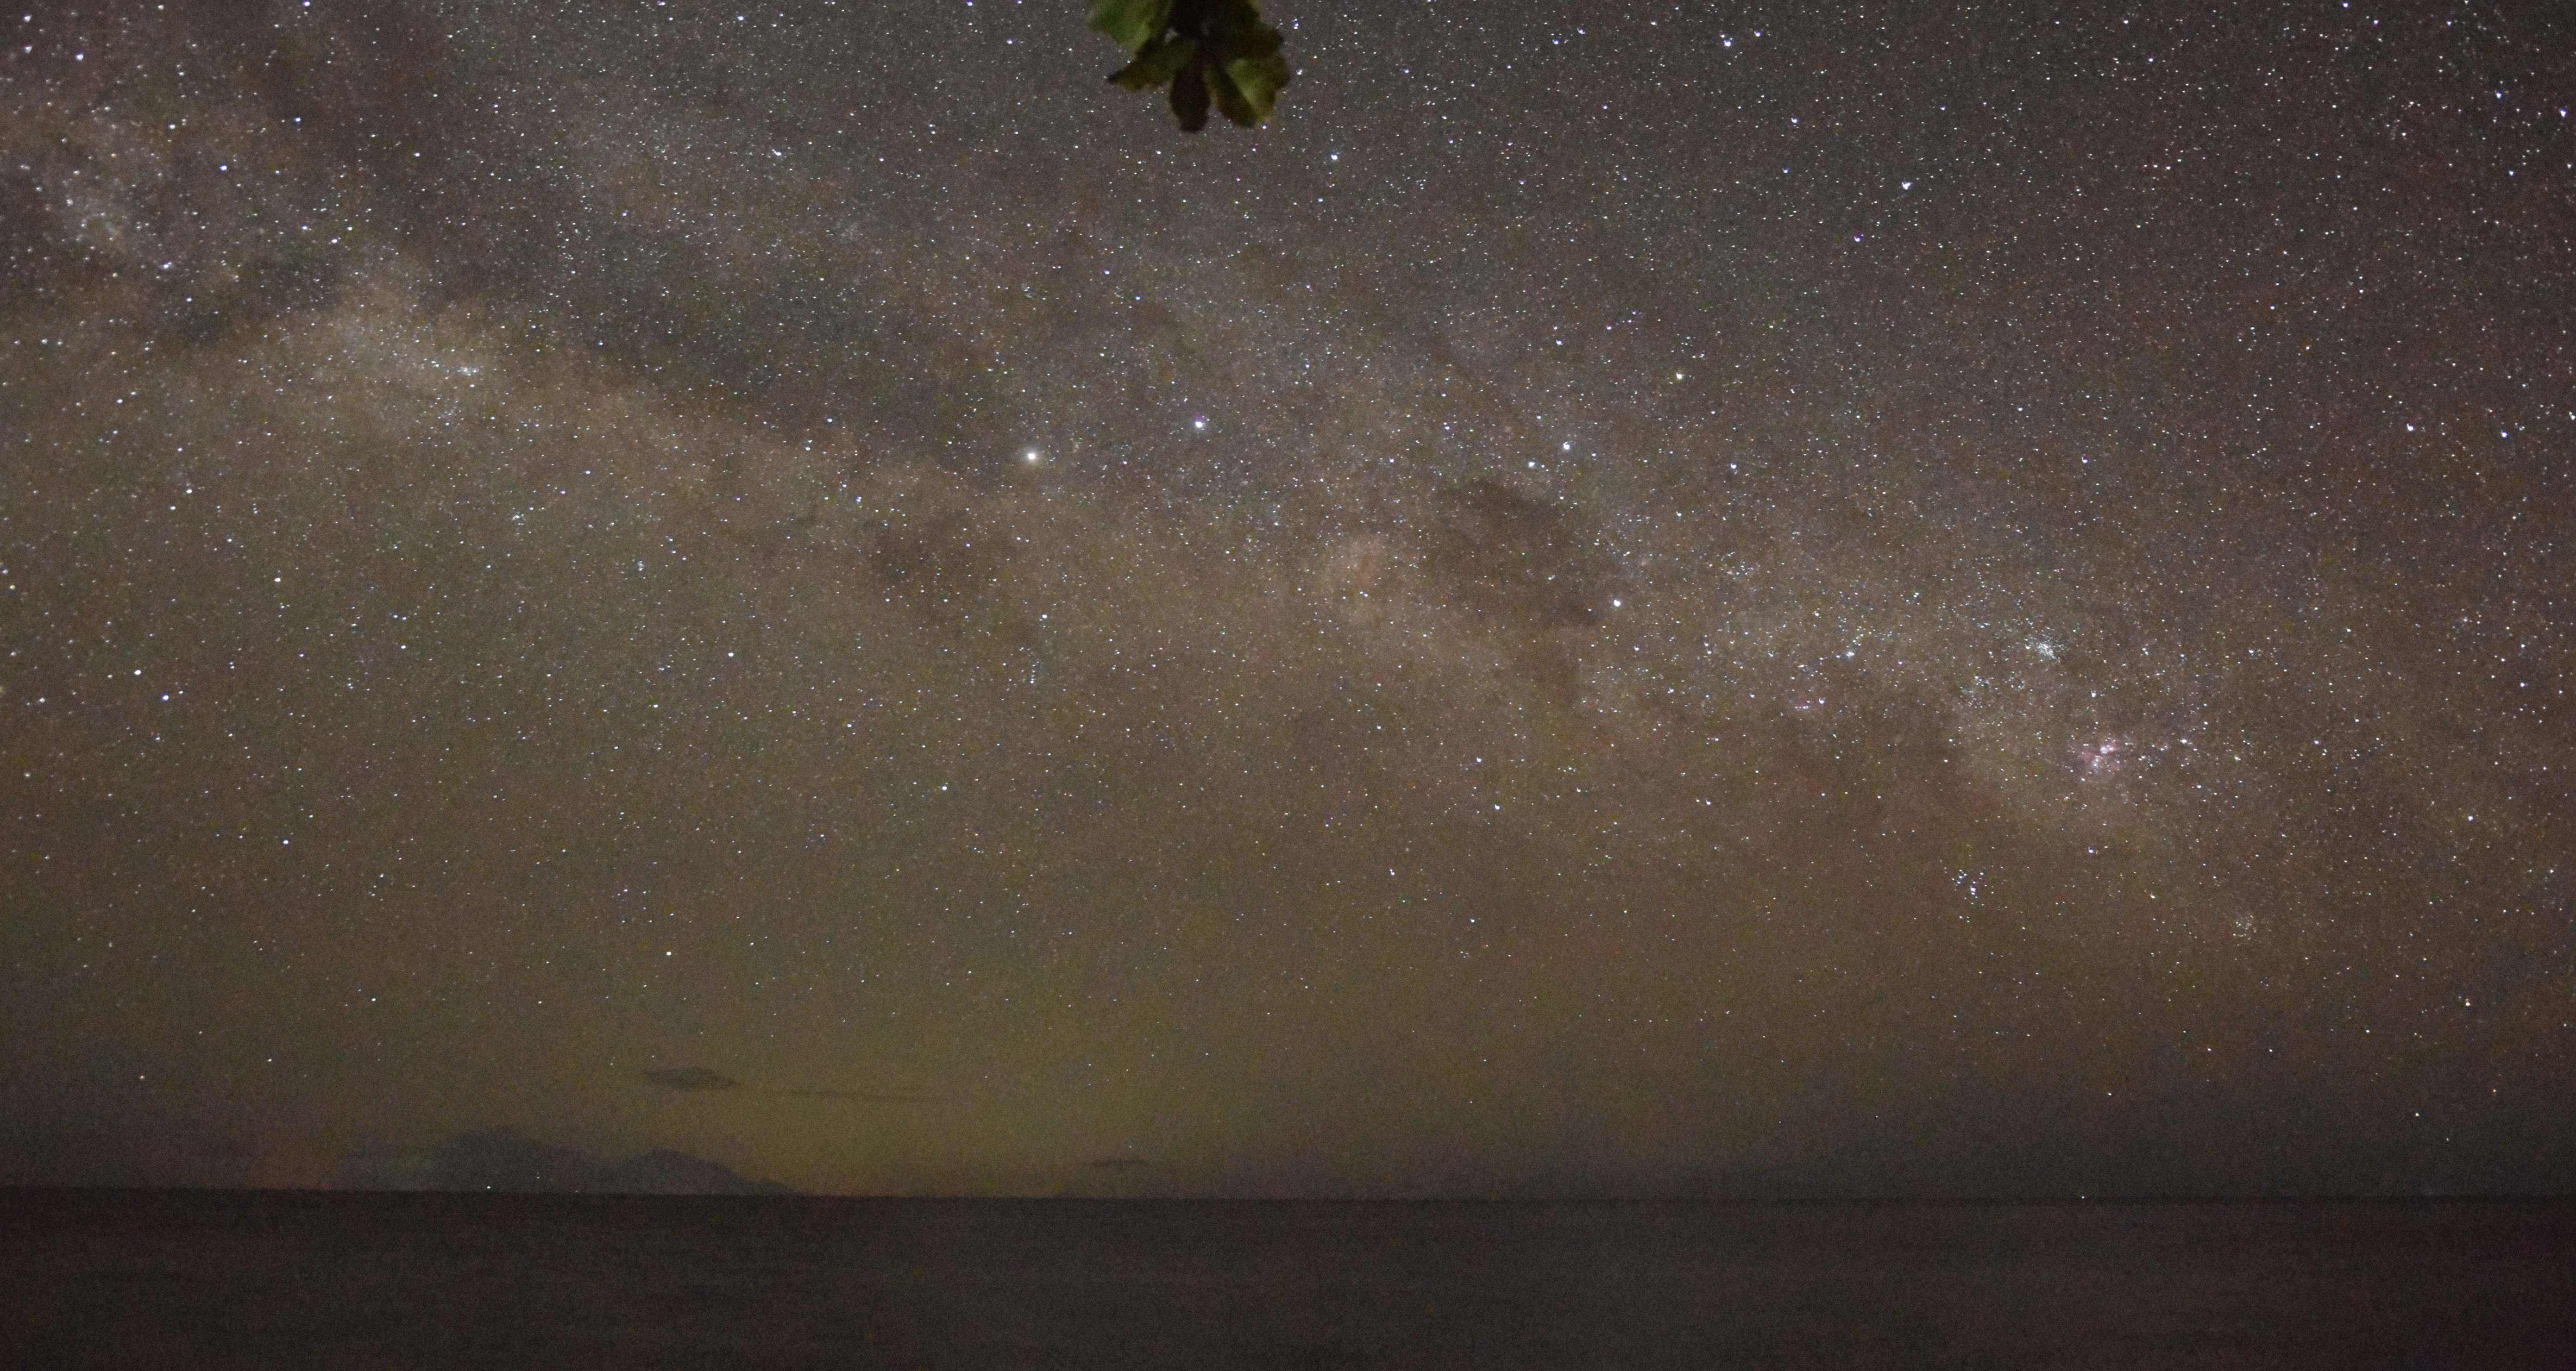 Milky Way with Crux and Rigel Centaurus seen from Bohol